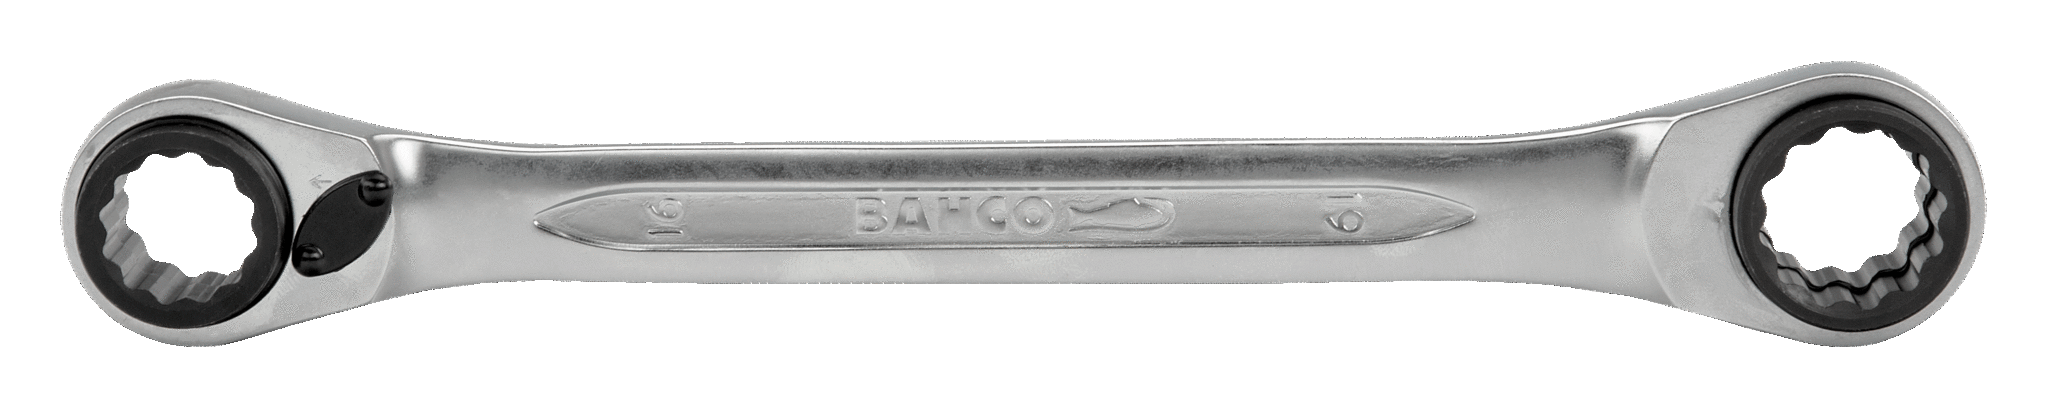 4-in-1 Ratcheting Ring Wrenches with Chrome Finish - S4RM-16-19 by Bahco